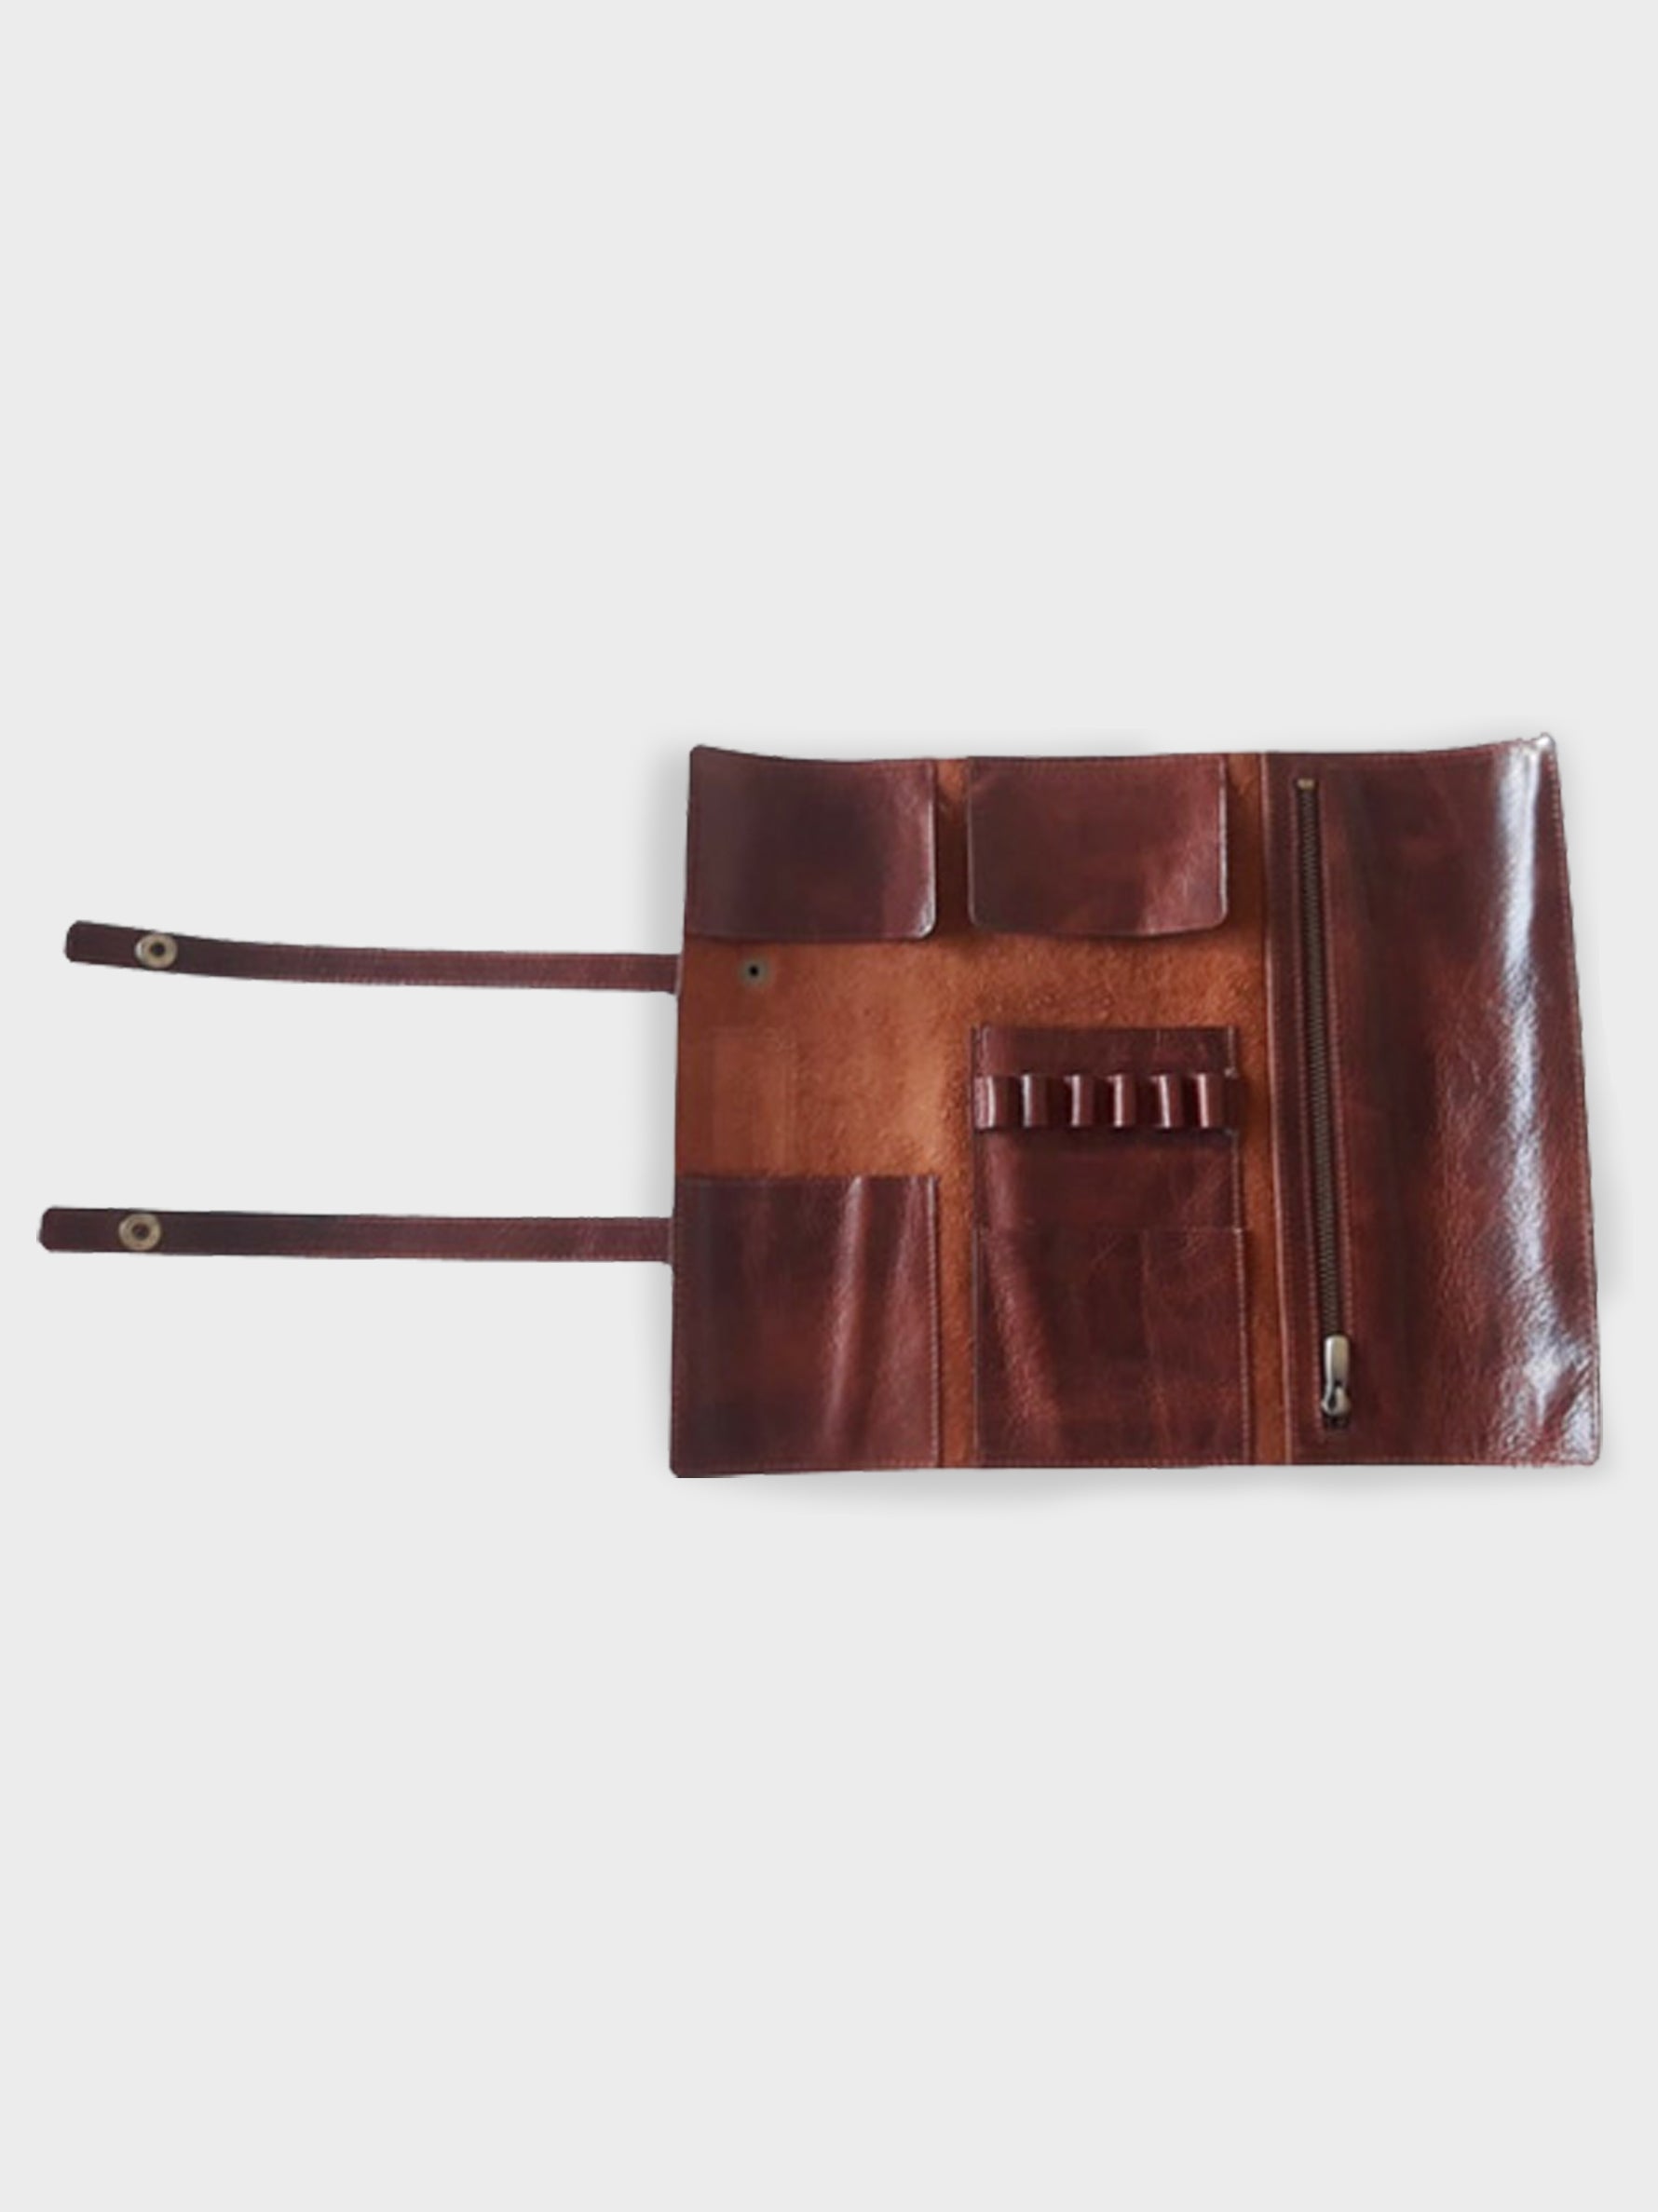 Handcrafted Genuine Vegetable Tanned Leather Artist's Roll Vintage Brown for Men & Women Tan & Loom